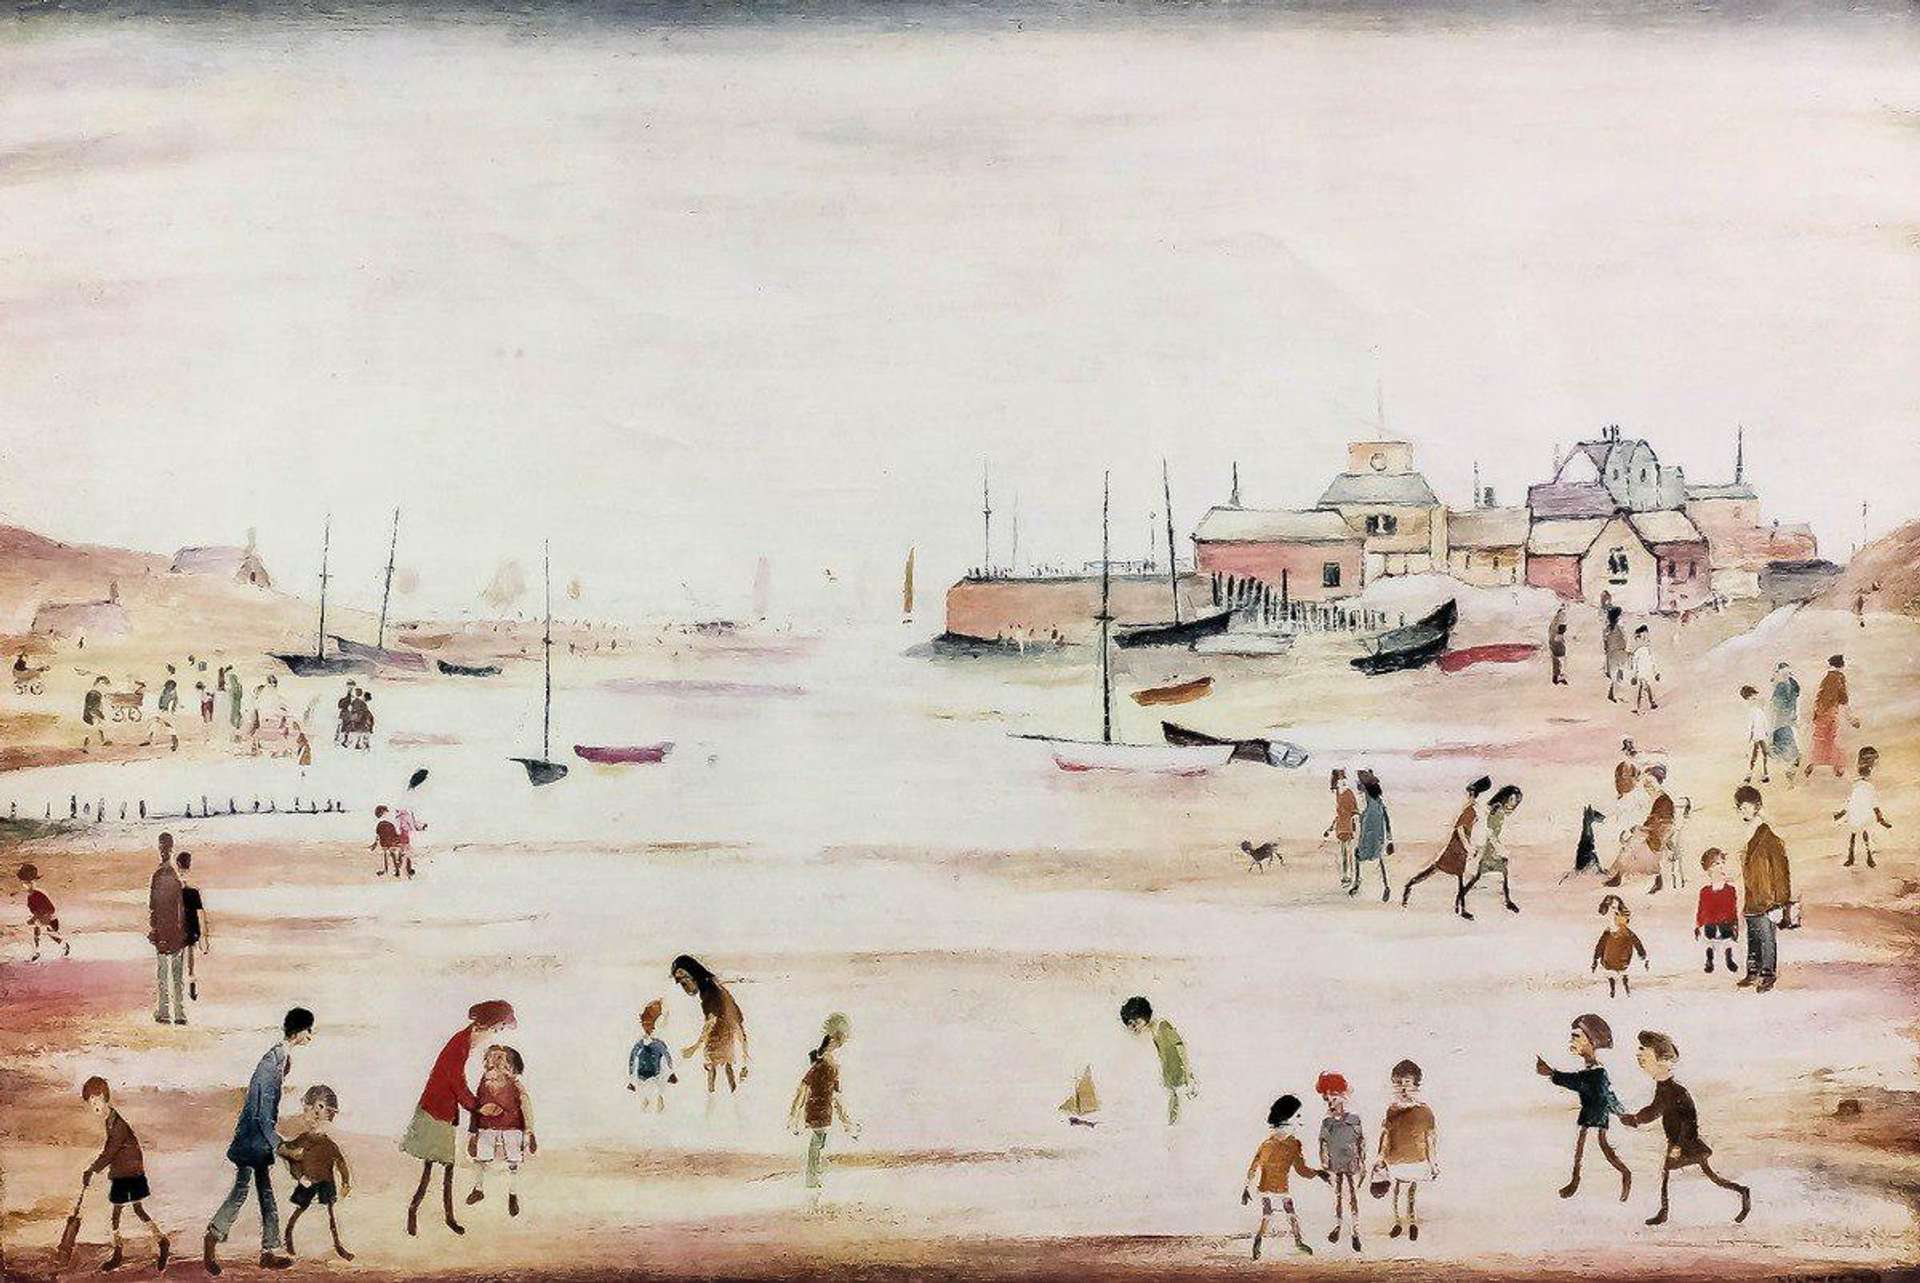 On The Sands by L. S. Lowry